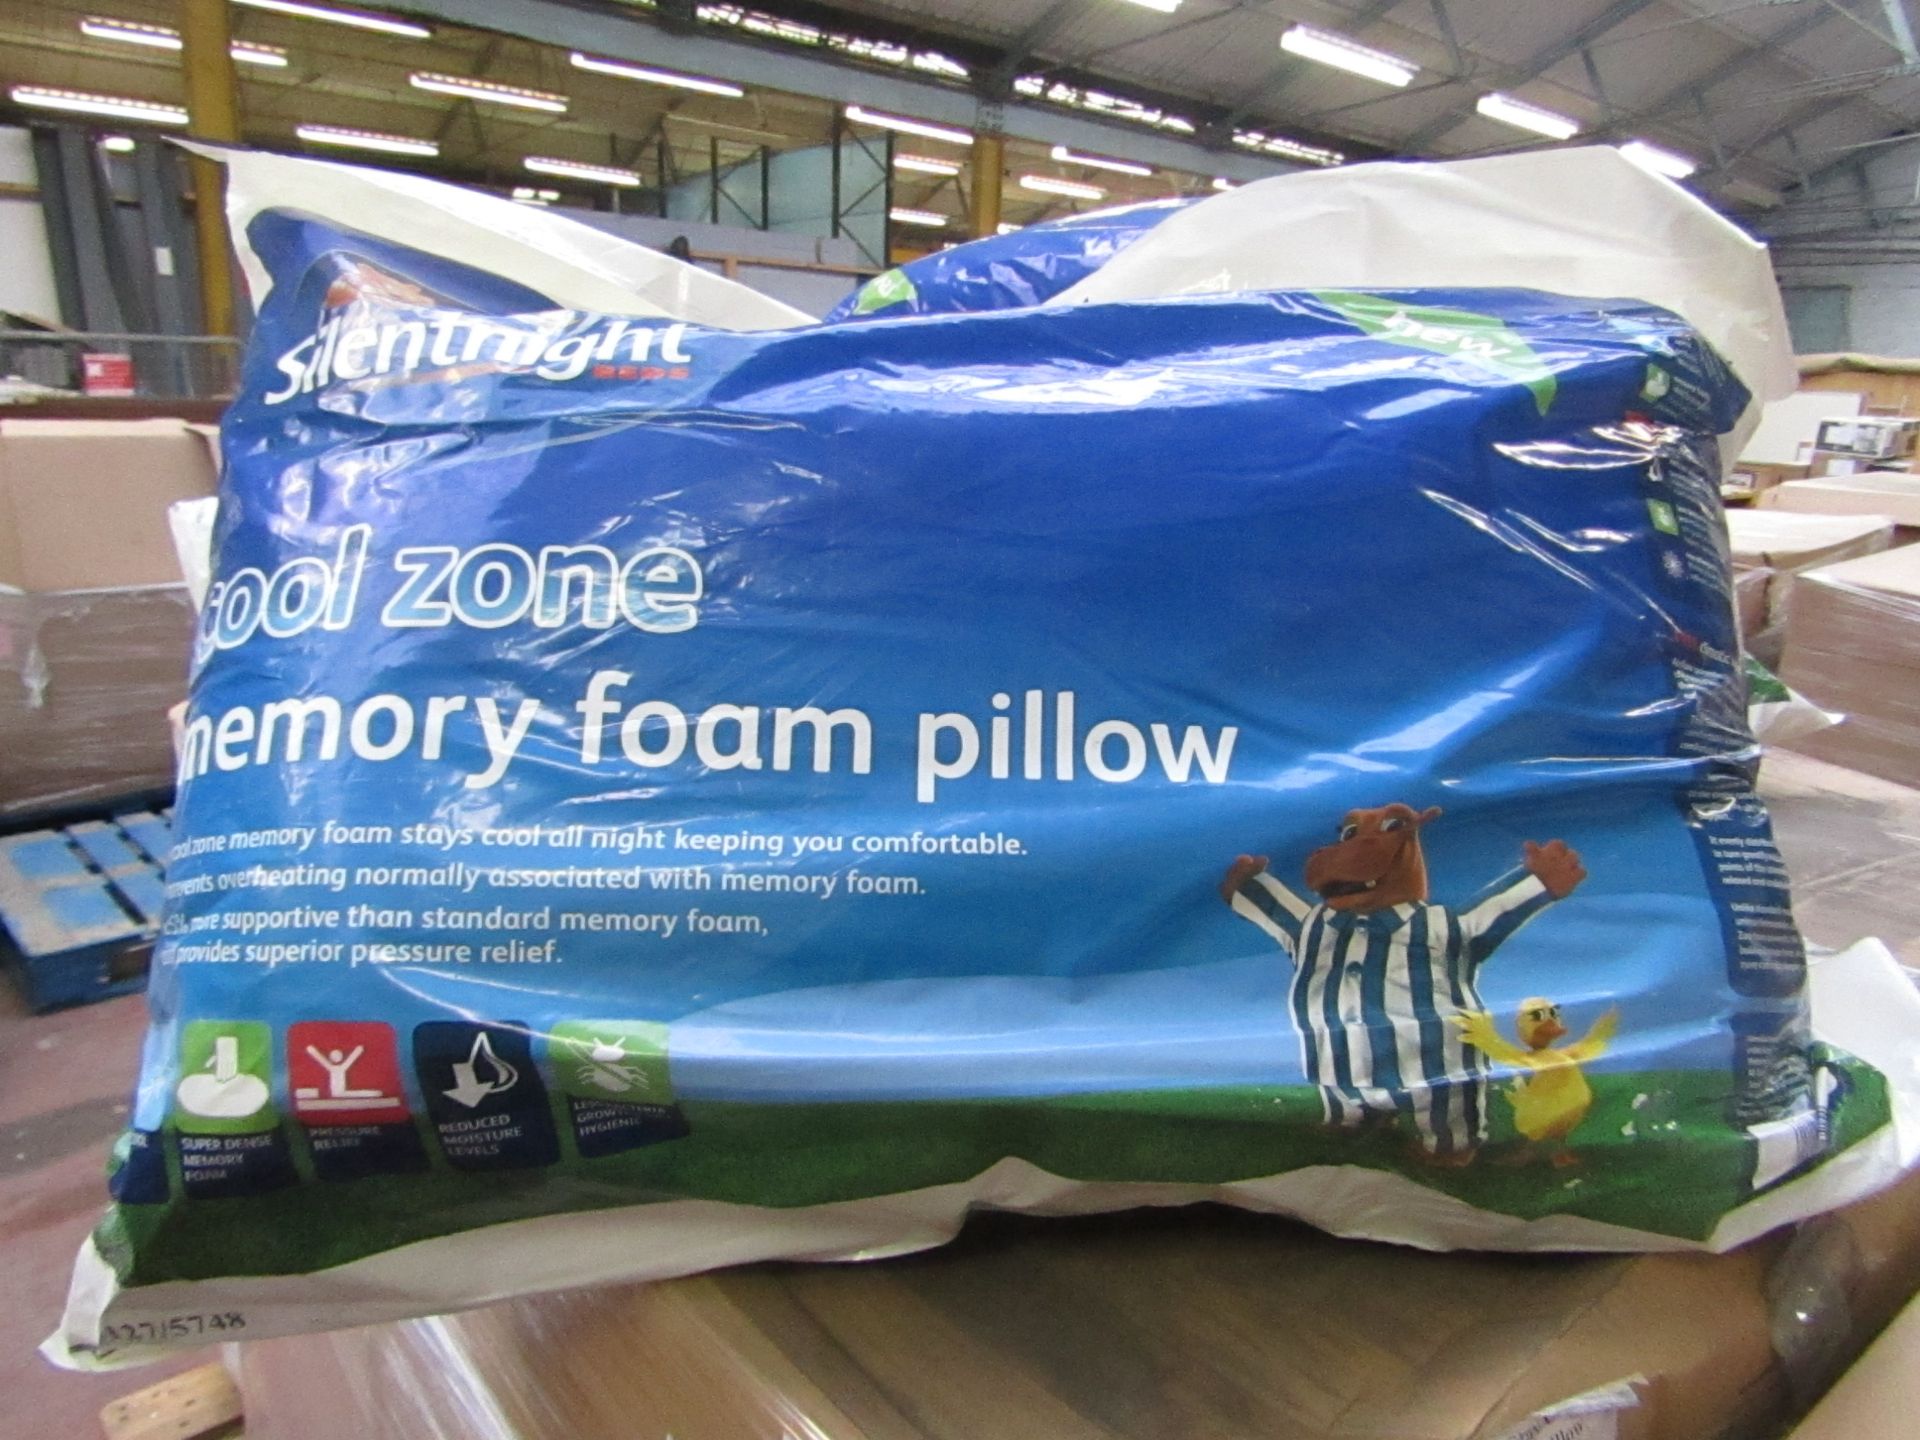 Silentnight Cool Zone memory foam pillow, brand new and packaged. RRP £19.99